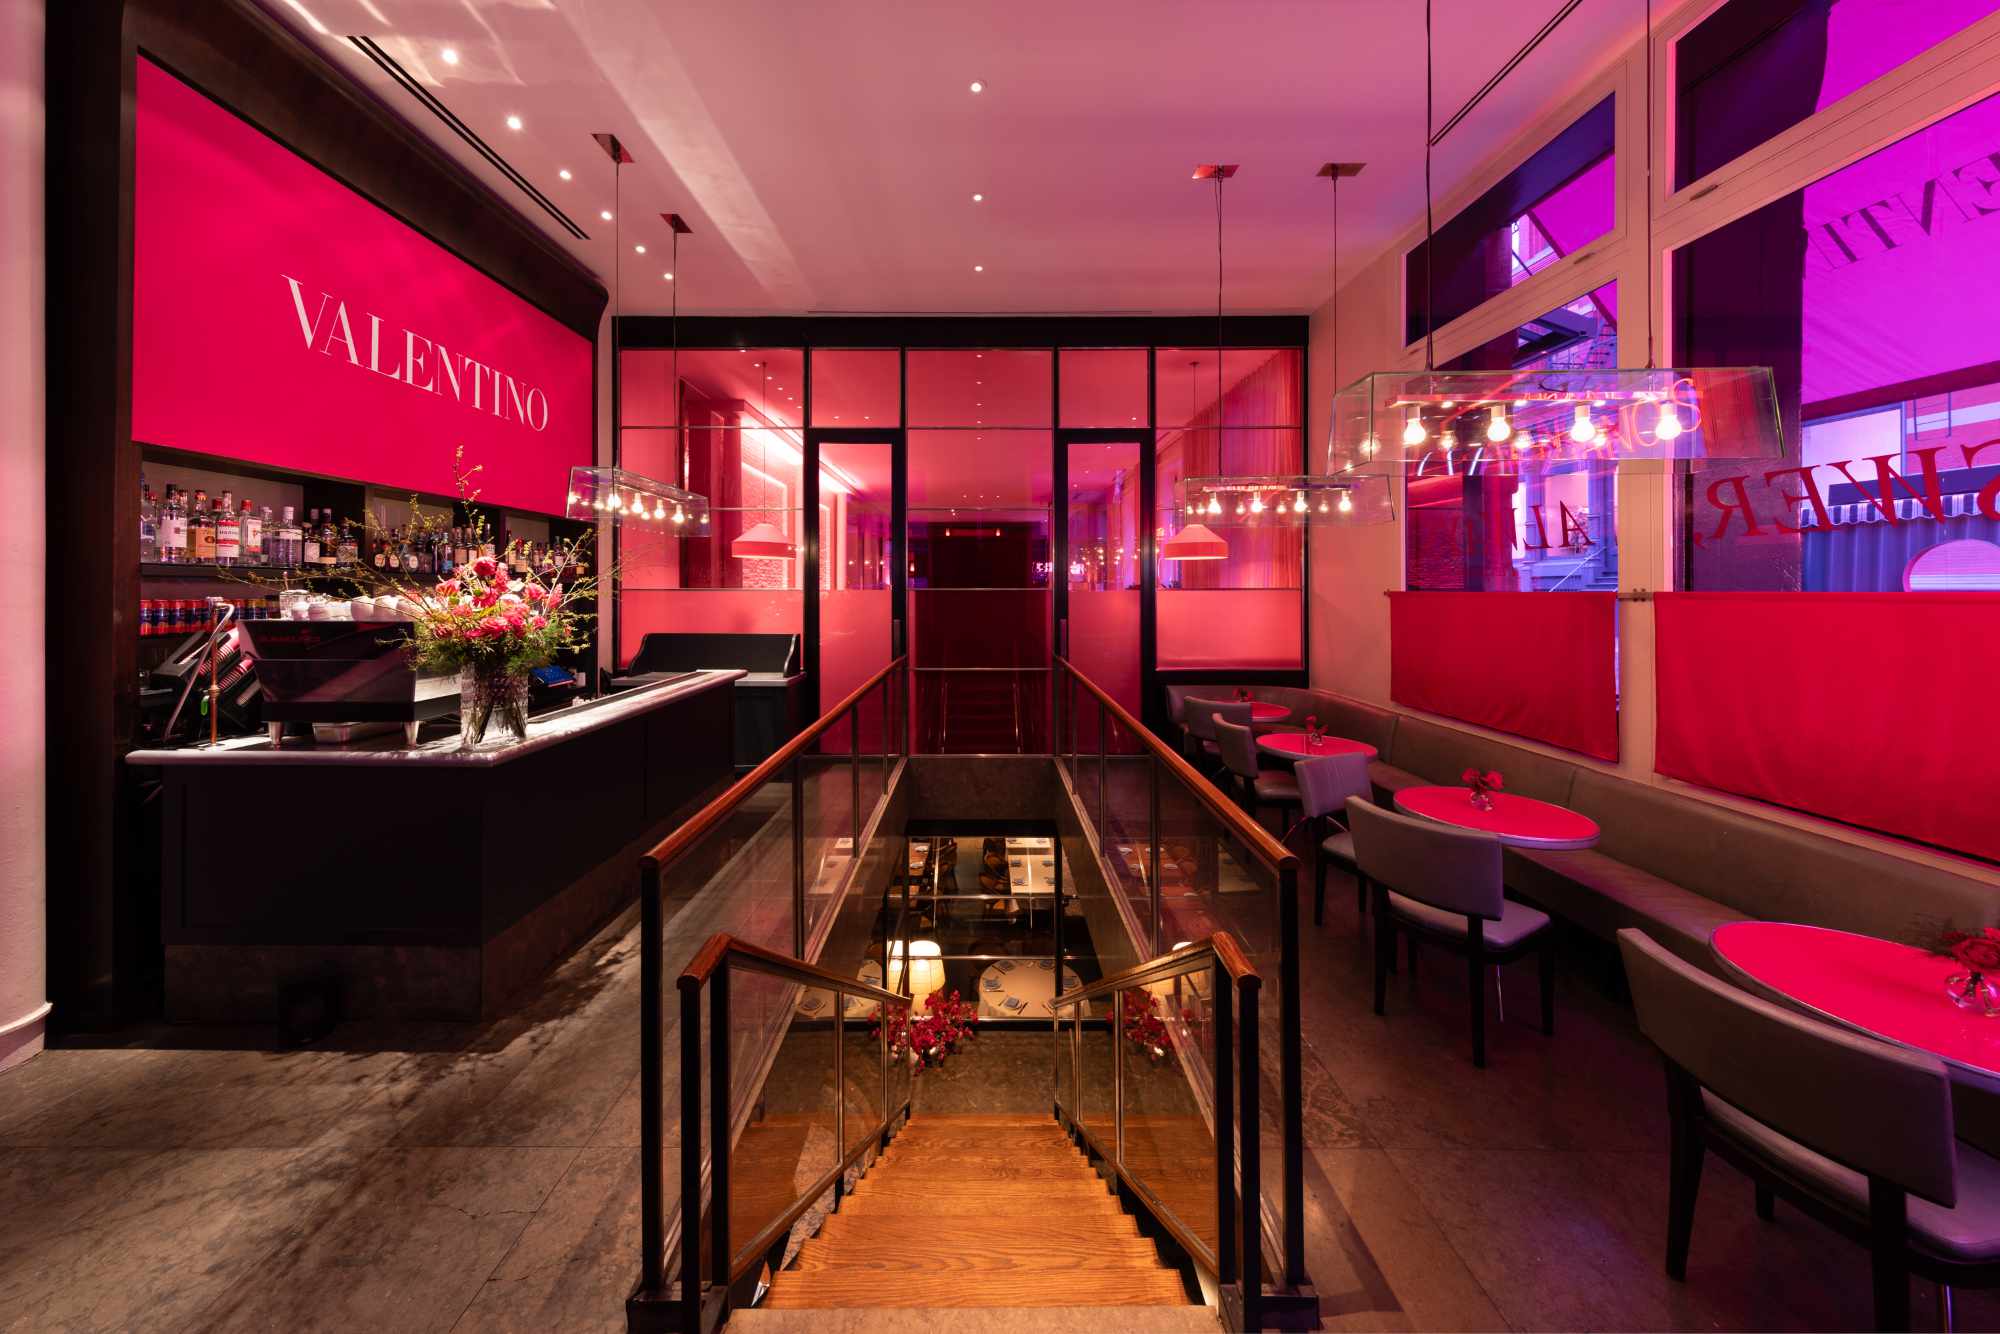 Valentino's Pink PP cafe at Sartiano's in New York City